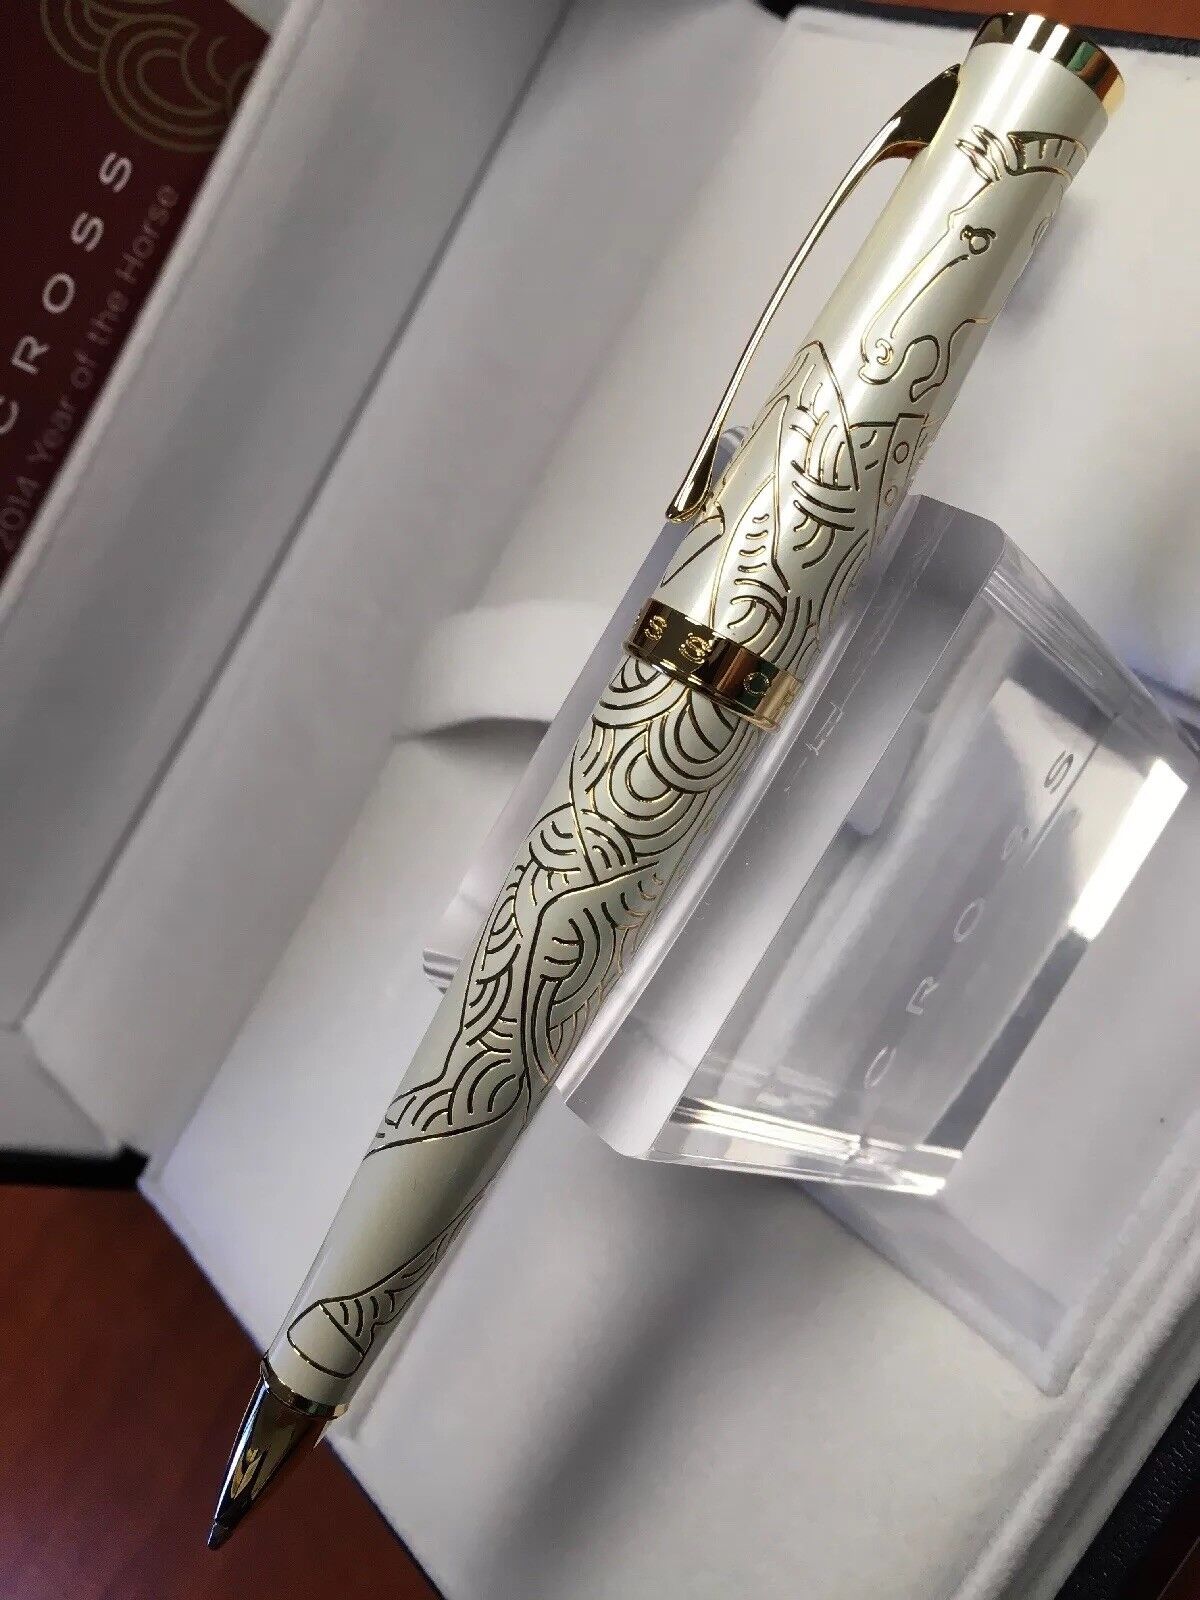 Cross Sauvage 2014 Year Of The Horse Imperial White Lacquer Ballpoint Pen